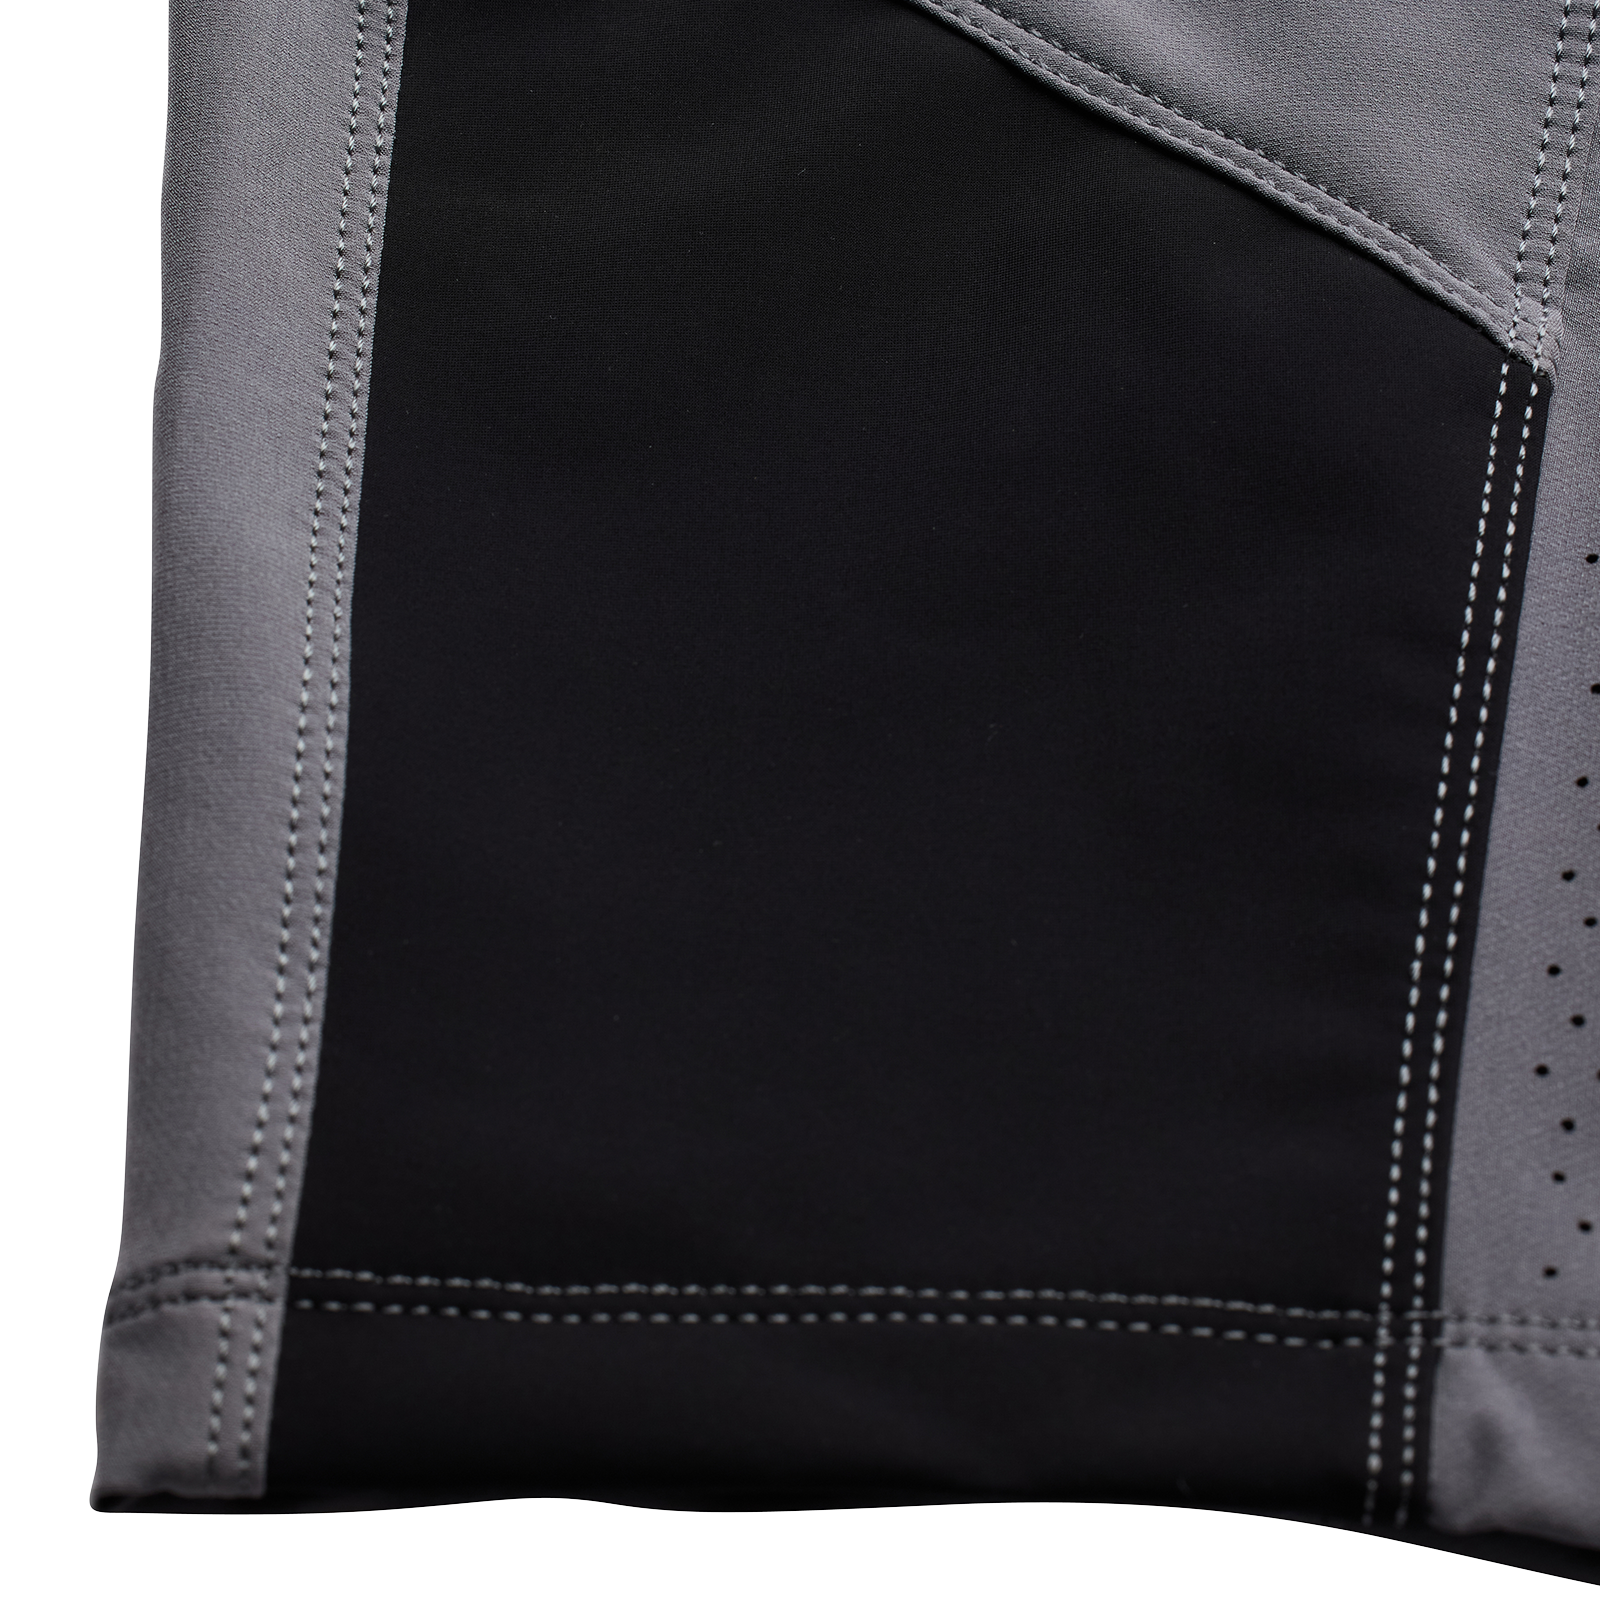 Close-up of a black and grey TLD Youth Sprint Pant Mono Charcoal with stitching and perforated details, designed for BMX racing.